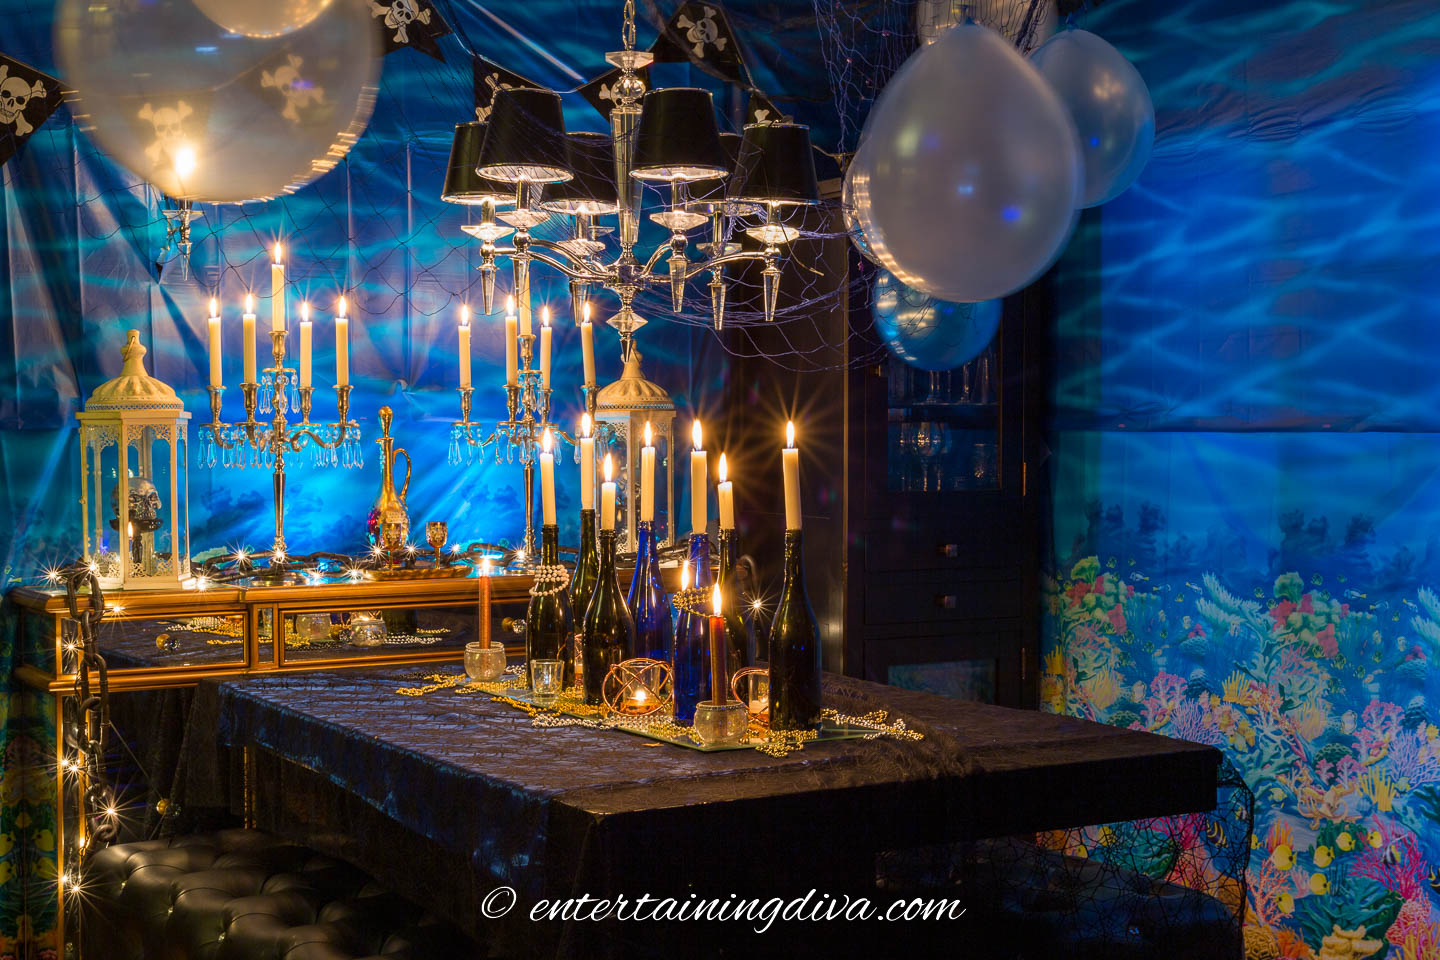 Under the sea party decor with an under the sea scene setter and balloons hung from the ceiling